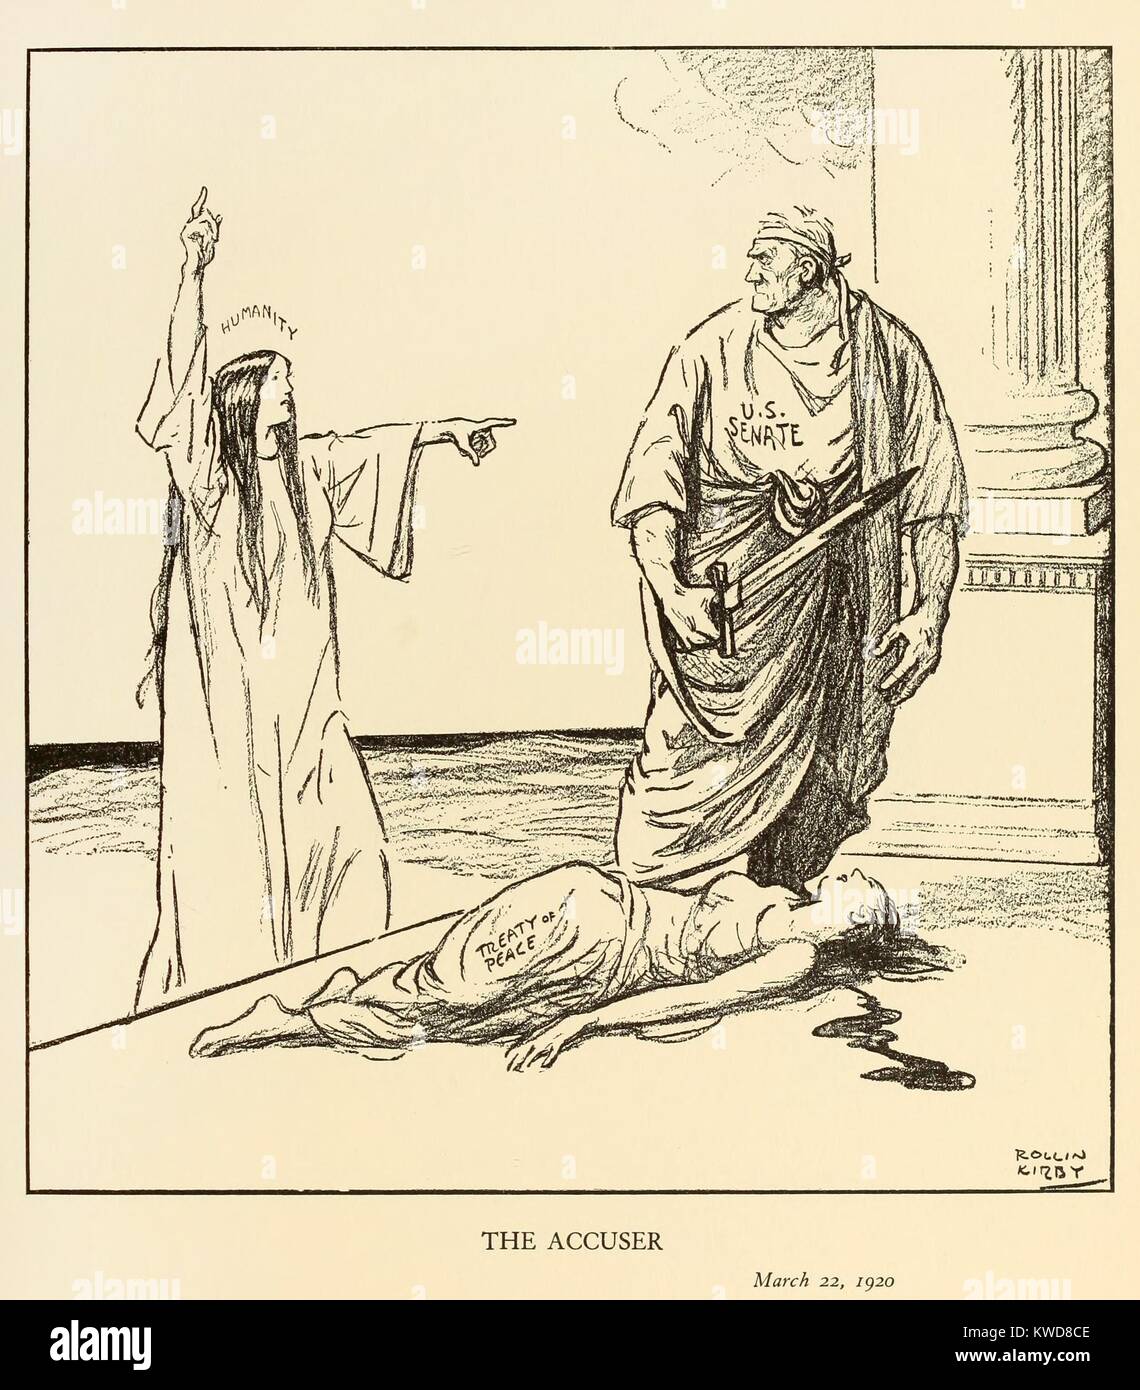 THE ACCUSER. Political cartoon about the U.S. rejection of the Treaty of Versailles after WW1. Personification of Humanity confronts the U.S. Senate for the murder of Treaty of Peace. By New York World cartoonist, Kirby Rollin, March 22, 1920. (BSLOC 2015 17 241) Stock Photo